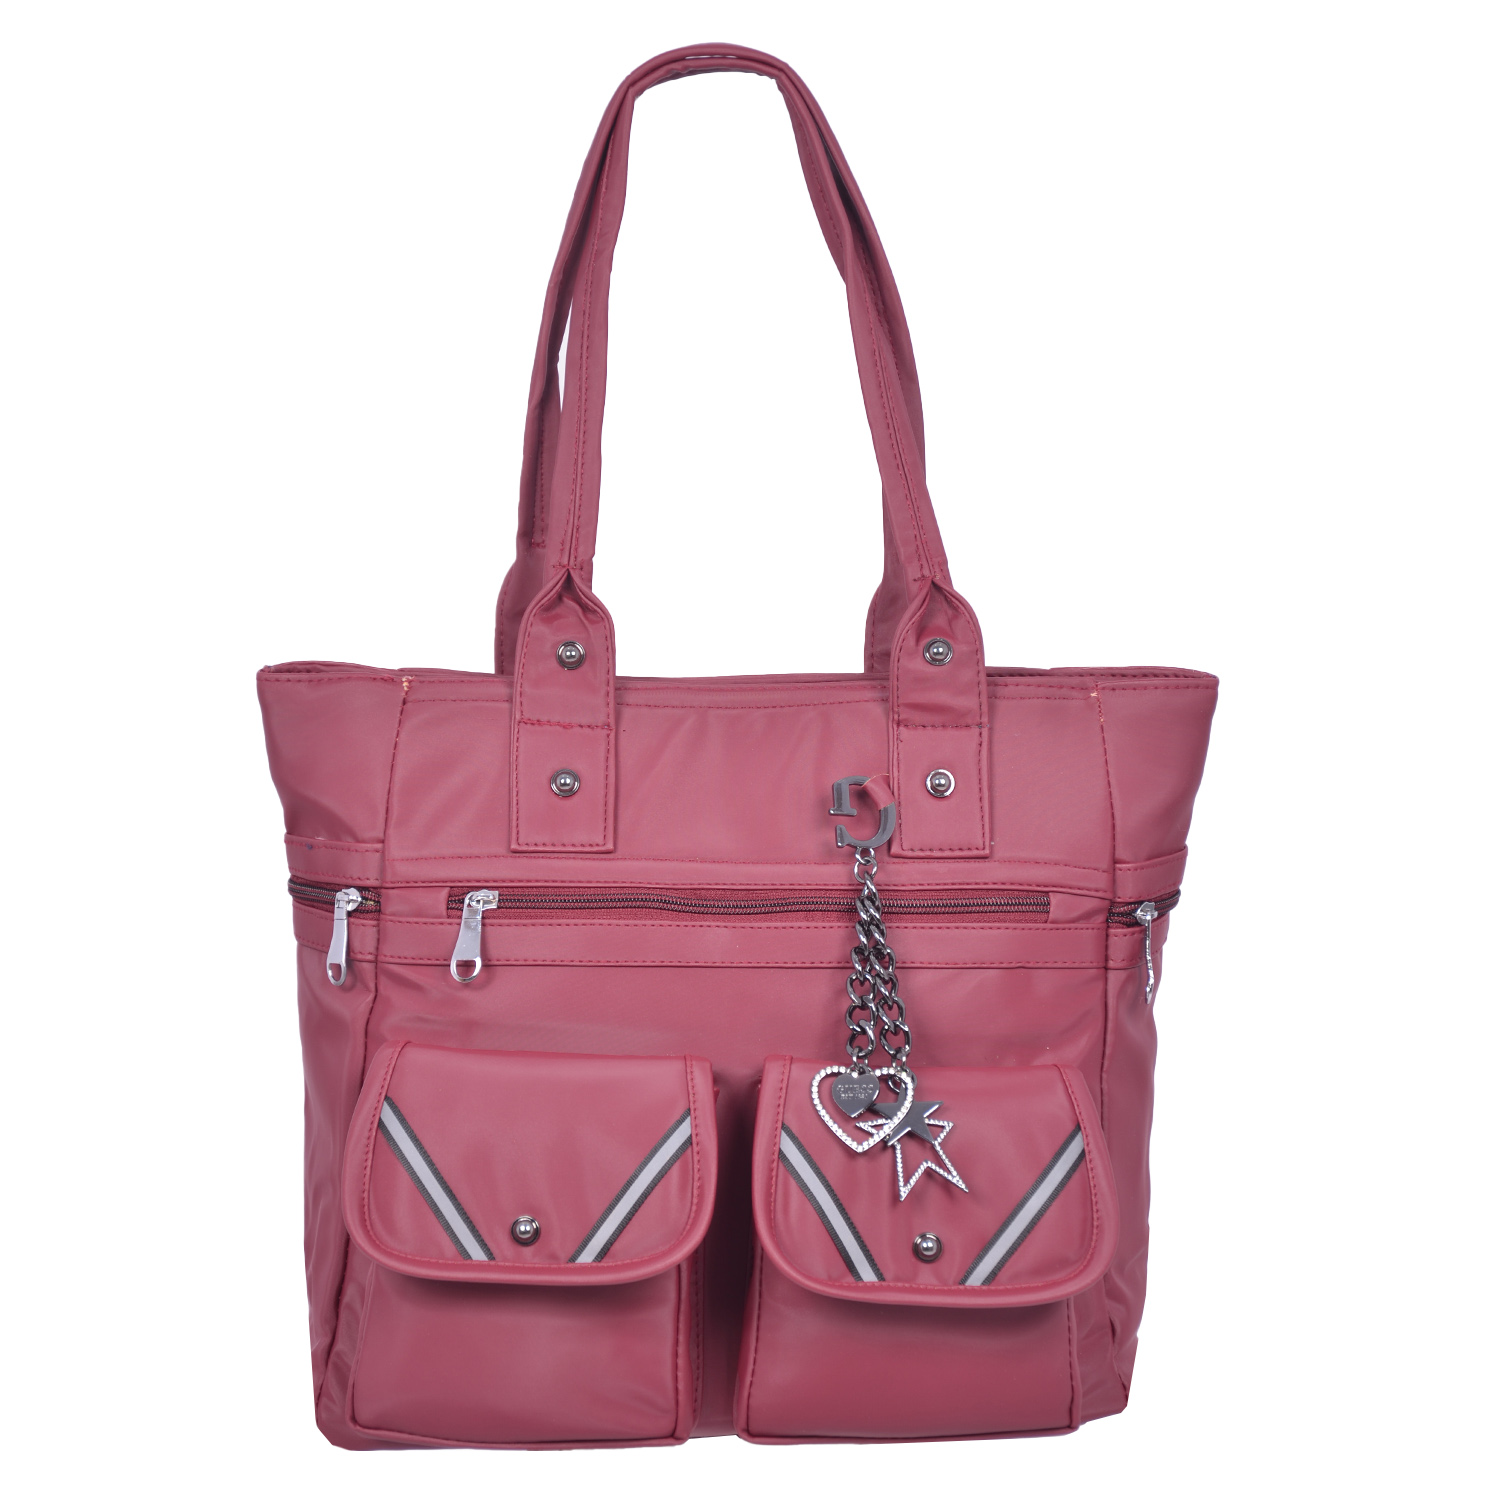 Roshanbags-ProductName